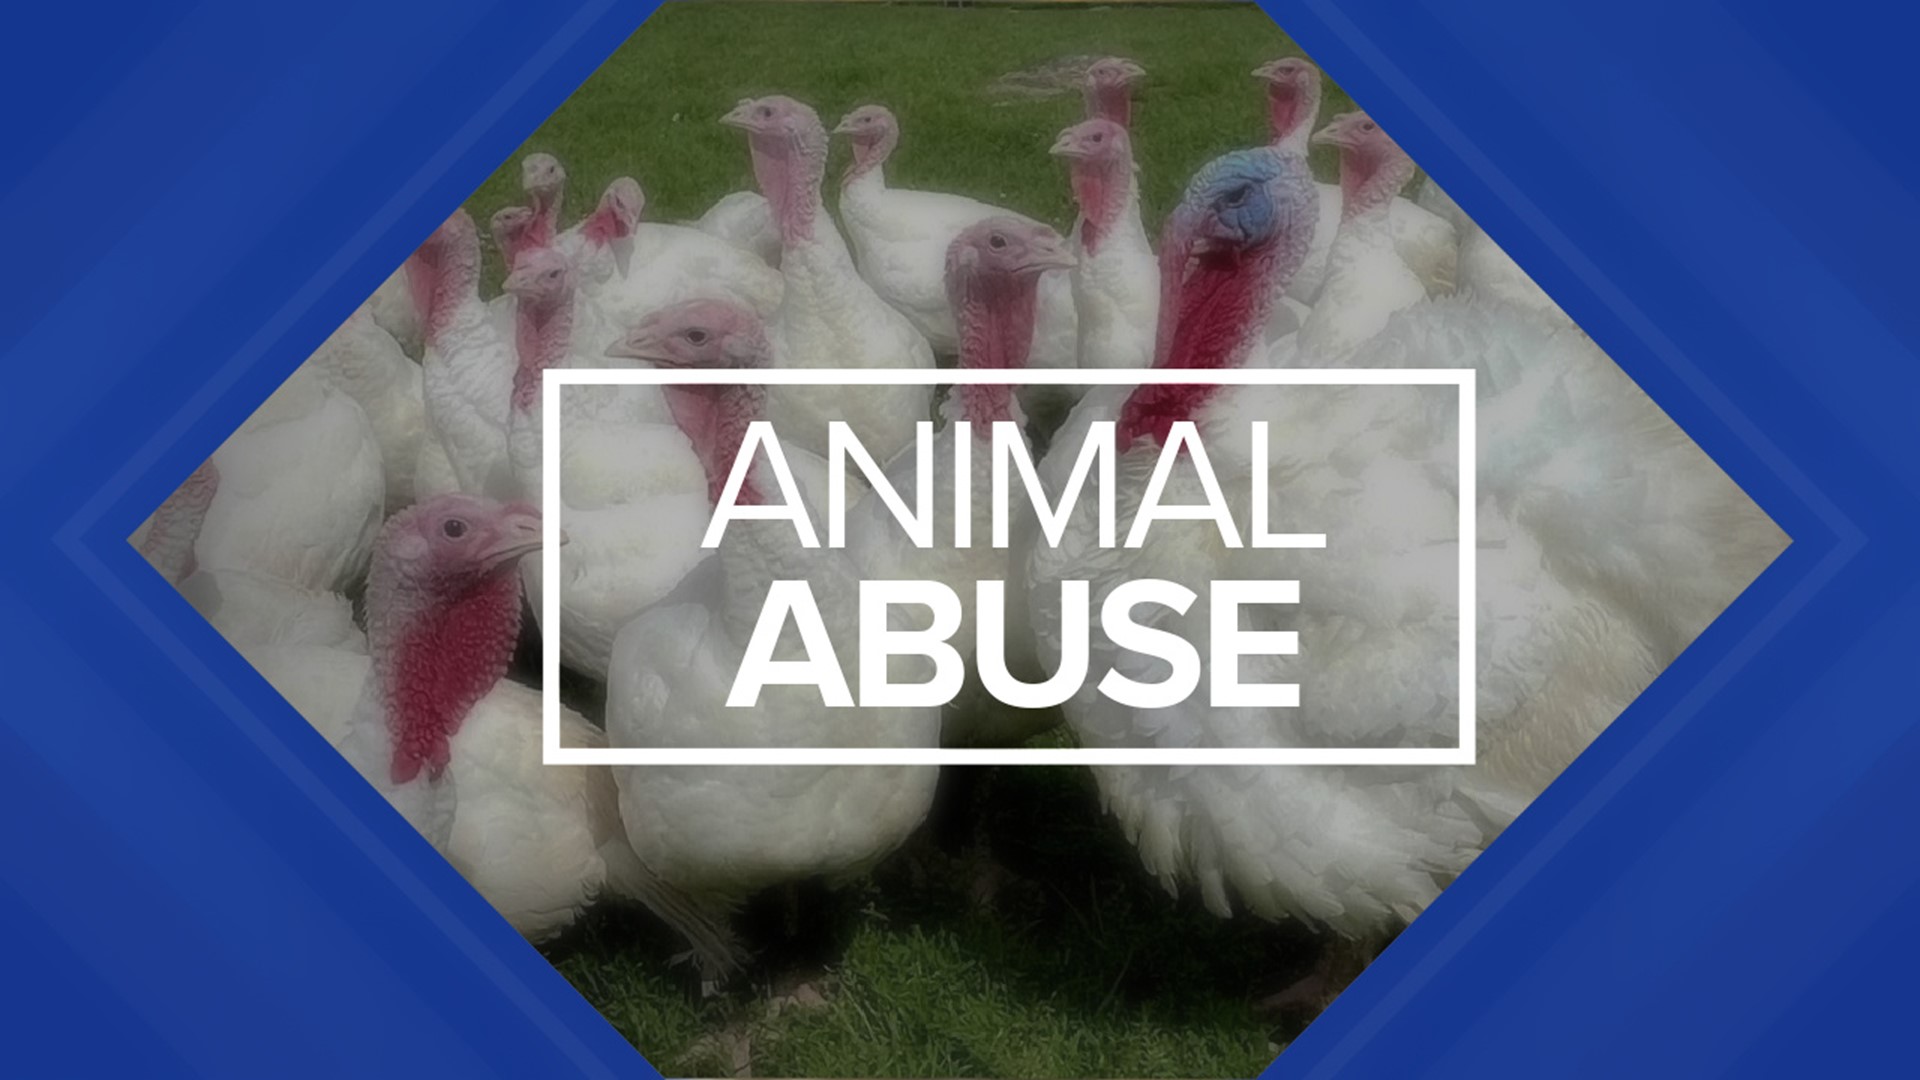 Workers charged with animal abuse at turkey farms 